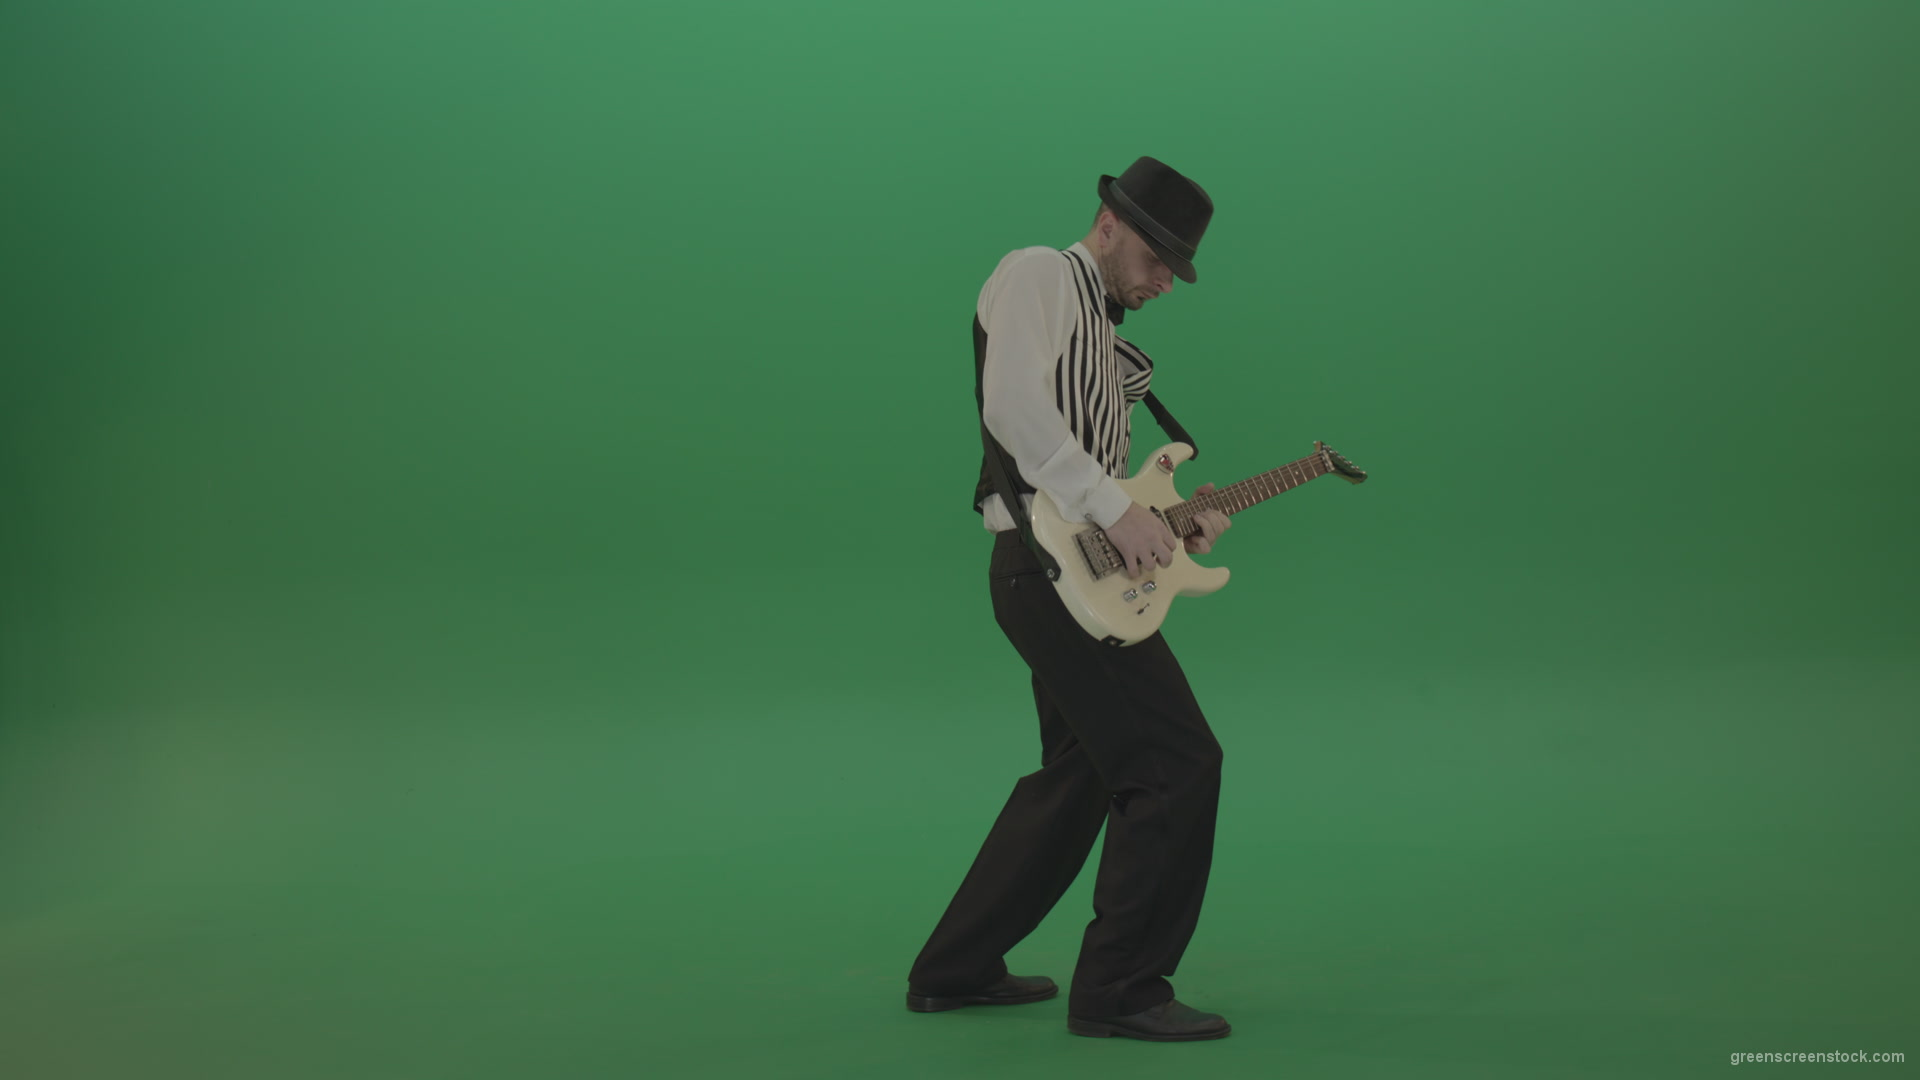 Jazz-man-musician-play-guitar-solo-music-in-guitar-on-green-screen-isolated-in-side-view_006 Green Screen Stock